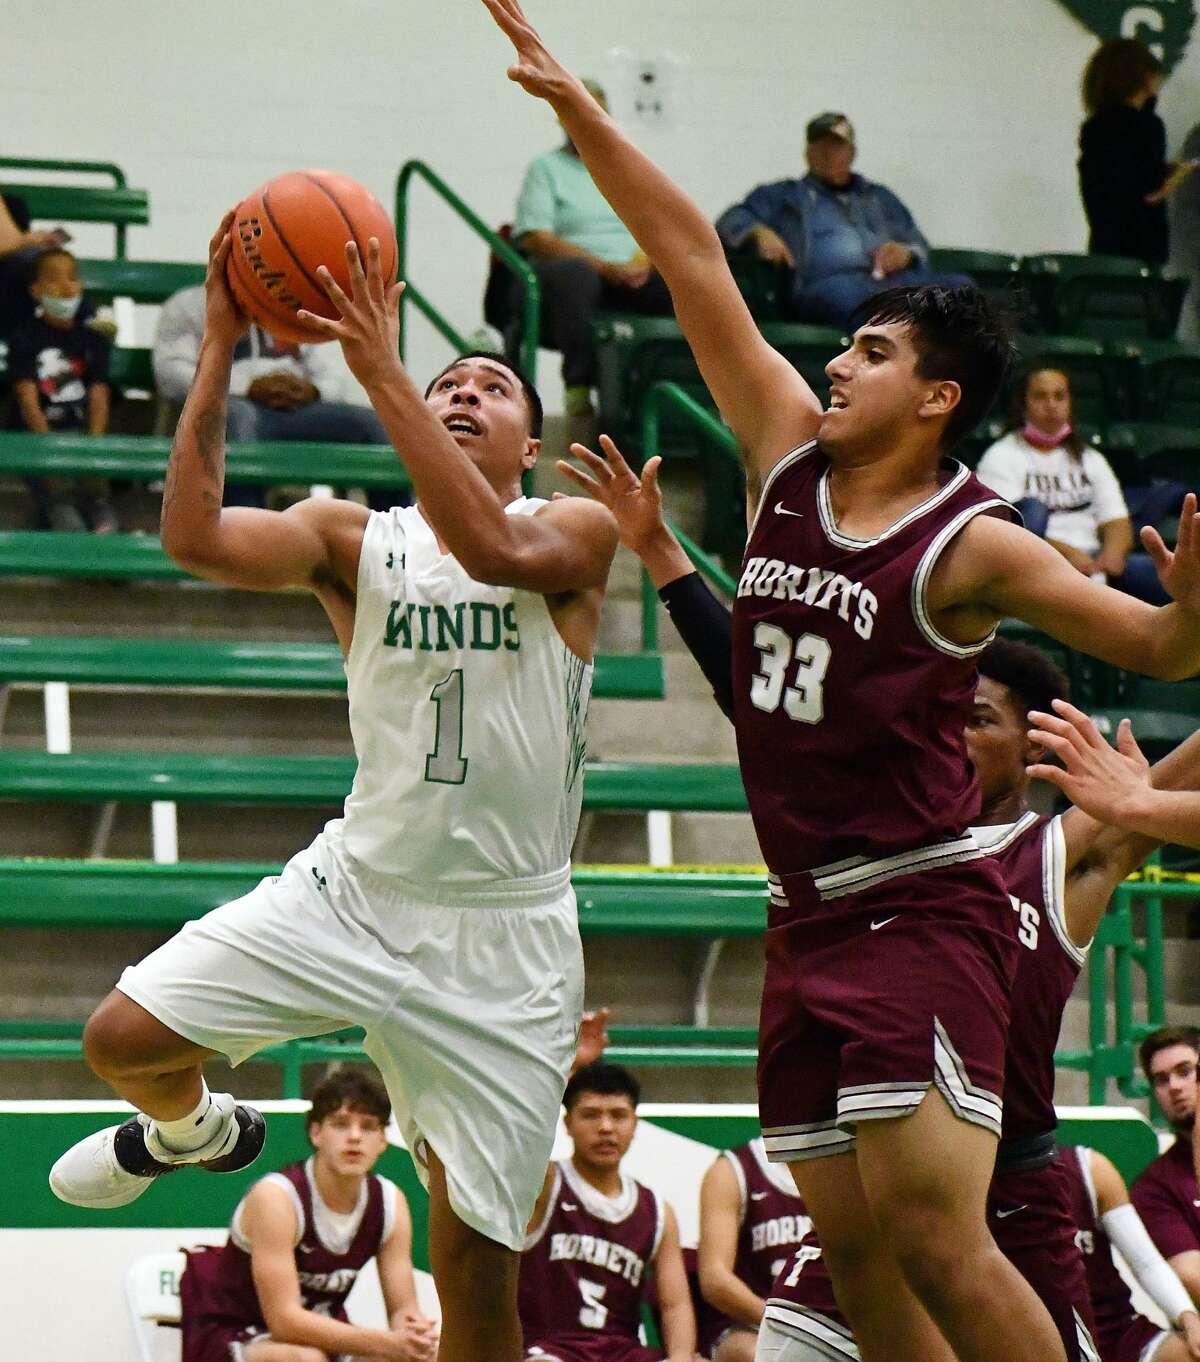 Floydada's Quincy Gonzales had 31 points to lead the Whirlwinds.